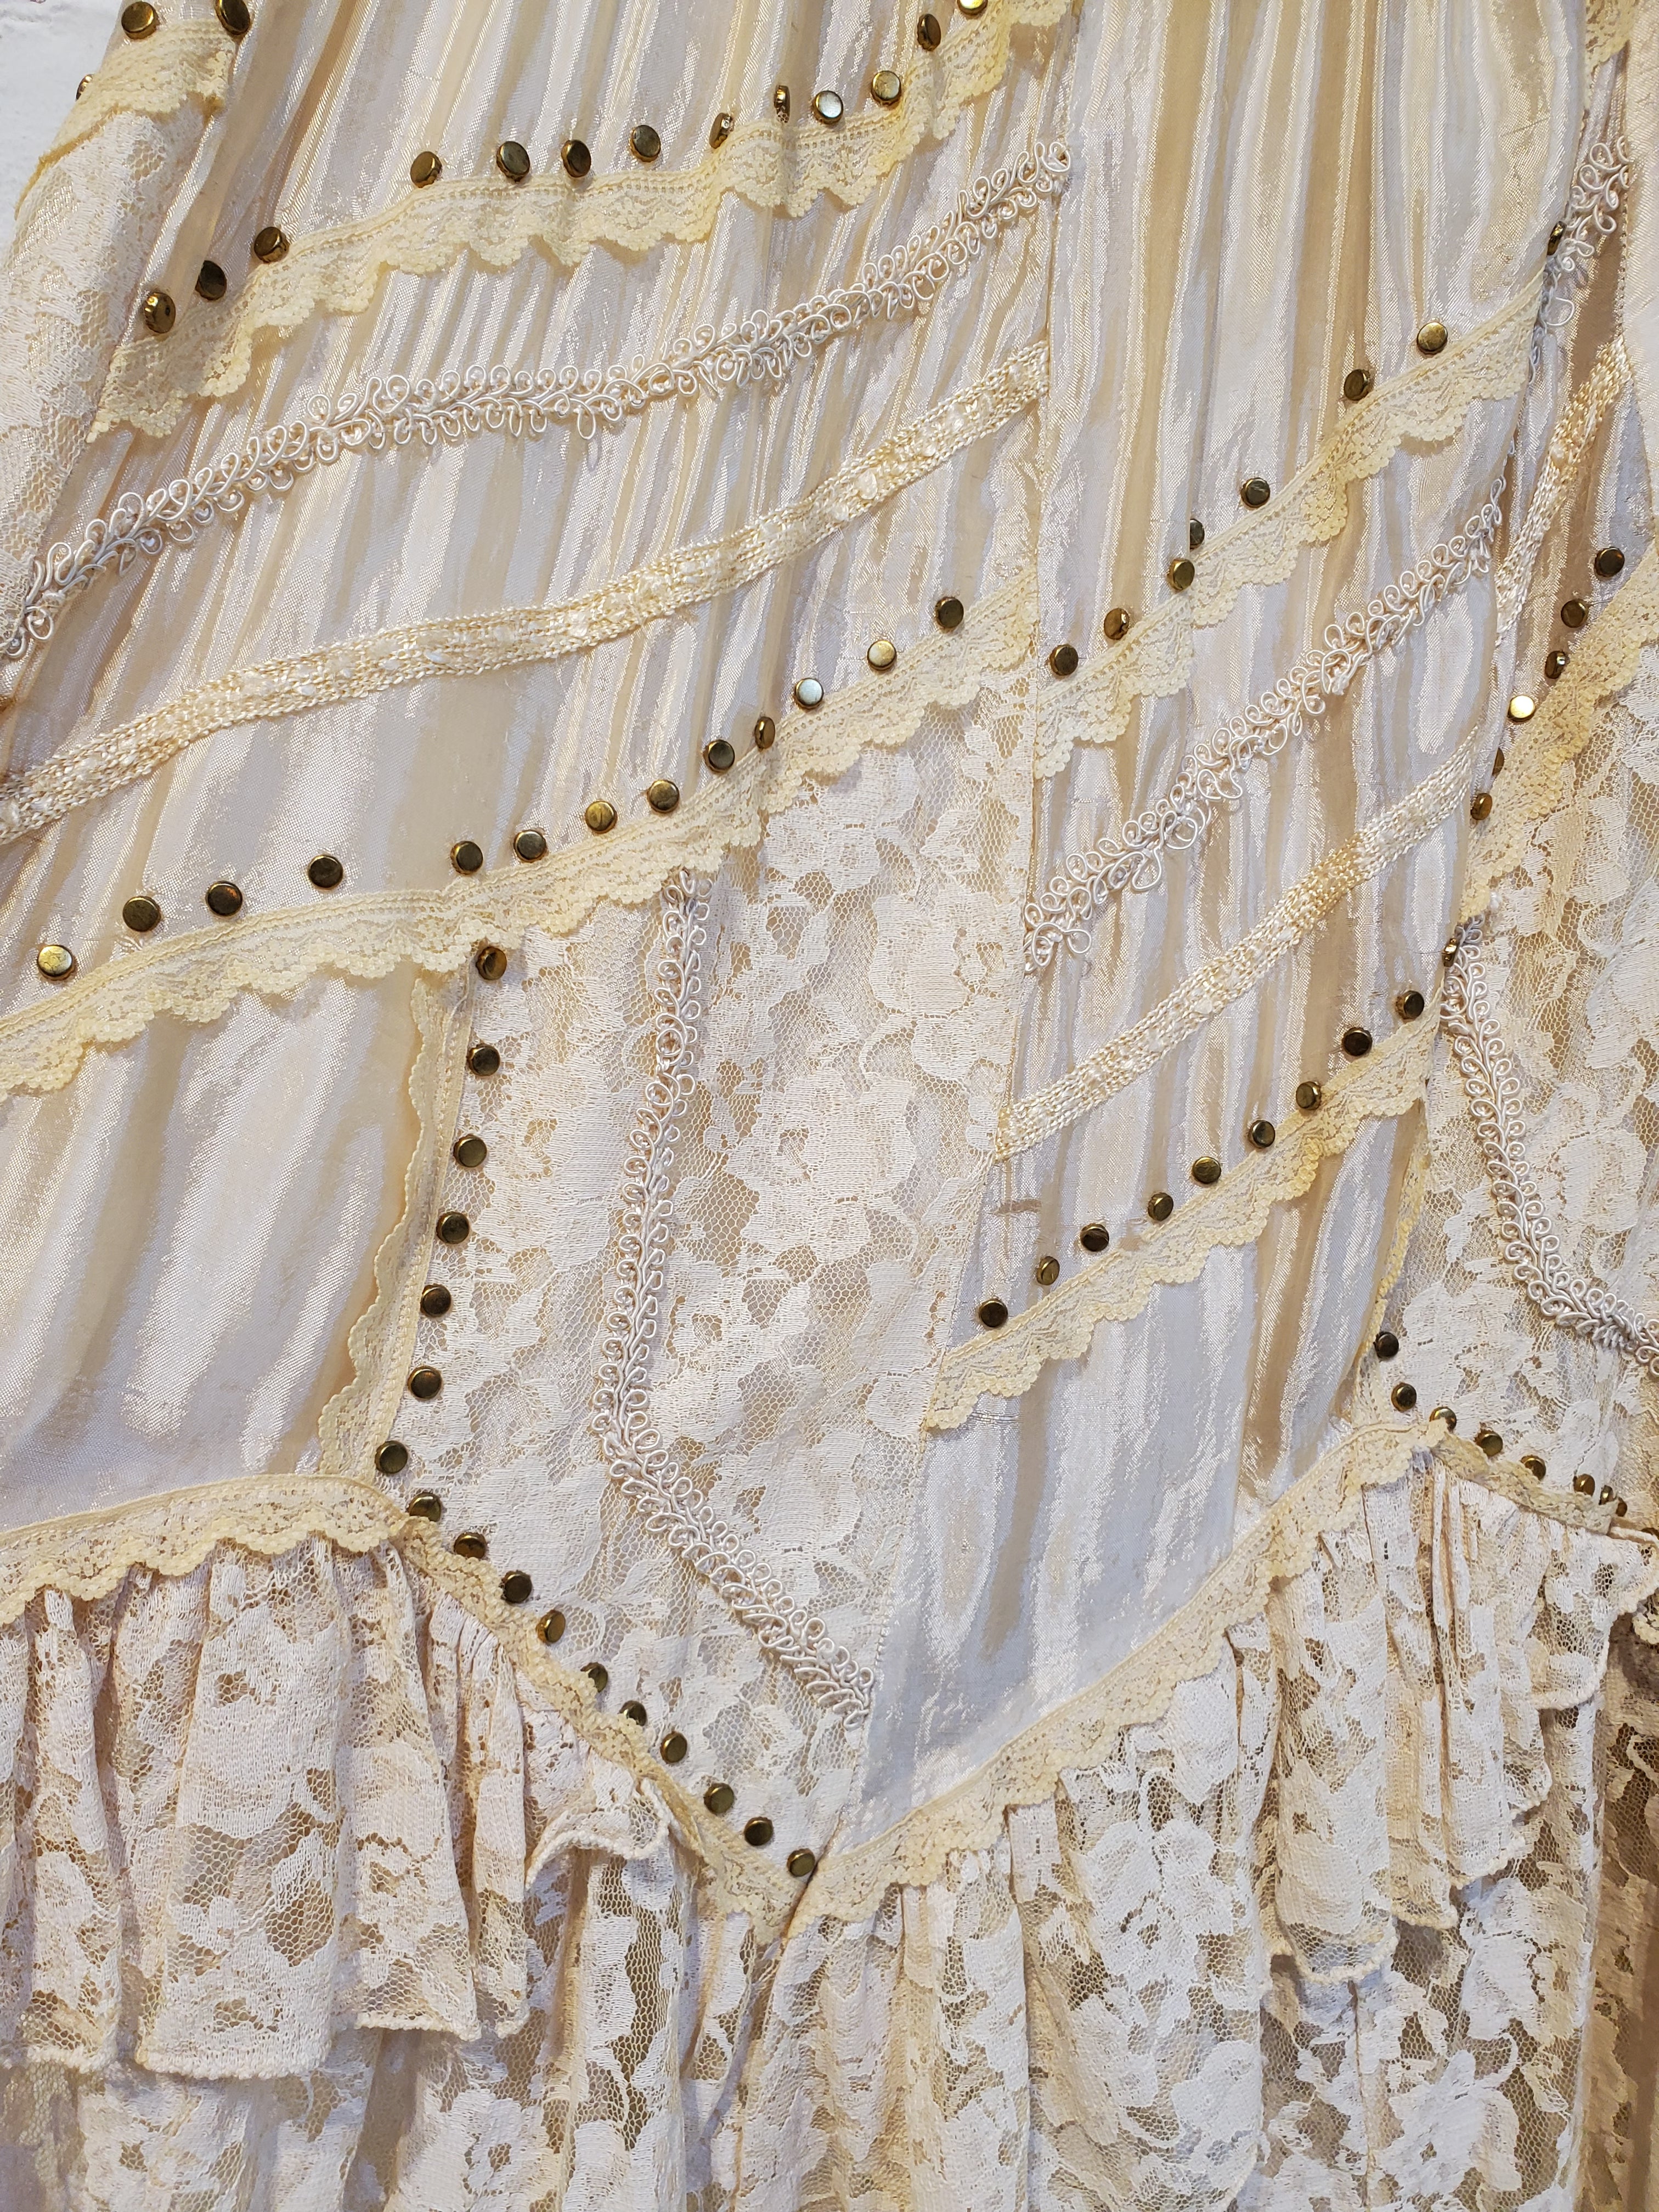 Vintage 1970s Antique Ivory Color Victorian Boho Style Long Ruffle Skirt